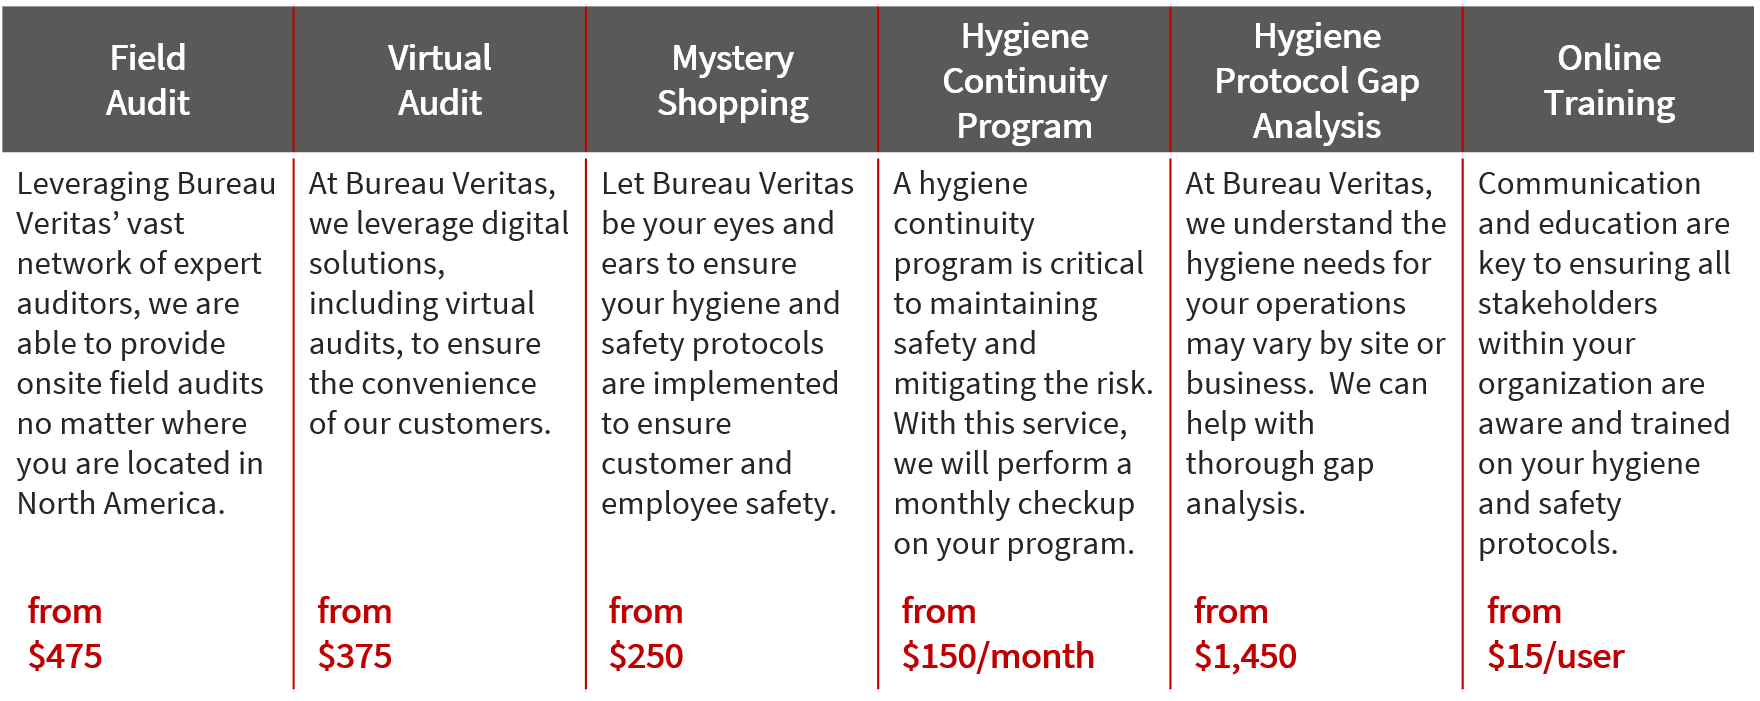 Pricing of the SafeGuard Services. Field Audit from $475. Virtual Audit from $375. Mystery shopping from $250. Hygiene Continuity Program from $150 a month. Hygiene Protocol Gap Analysis from $1,450. Online Training from $15 per user.